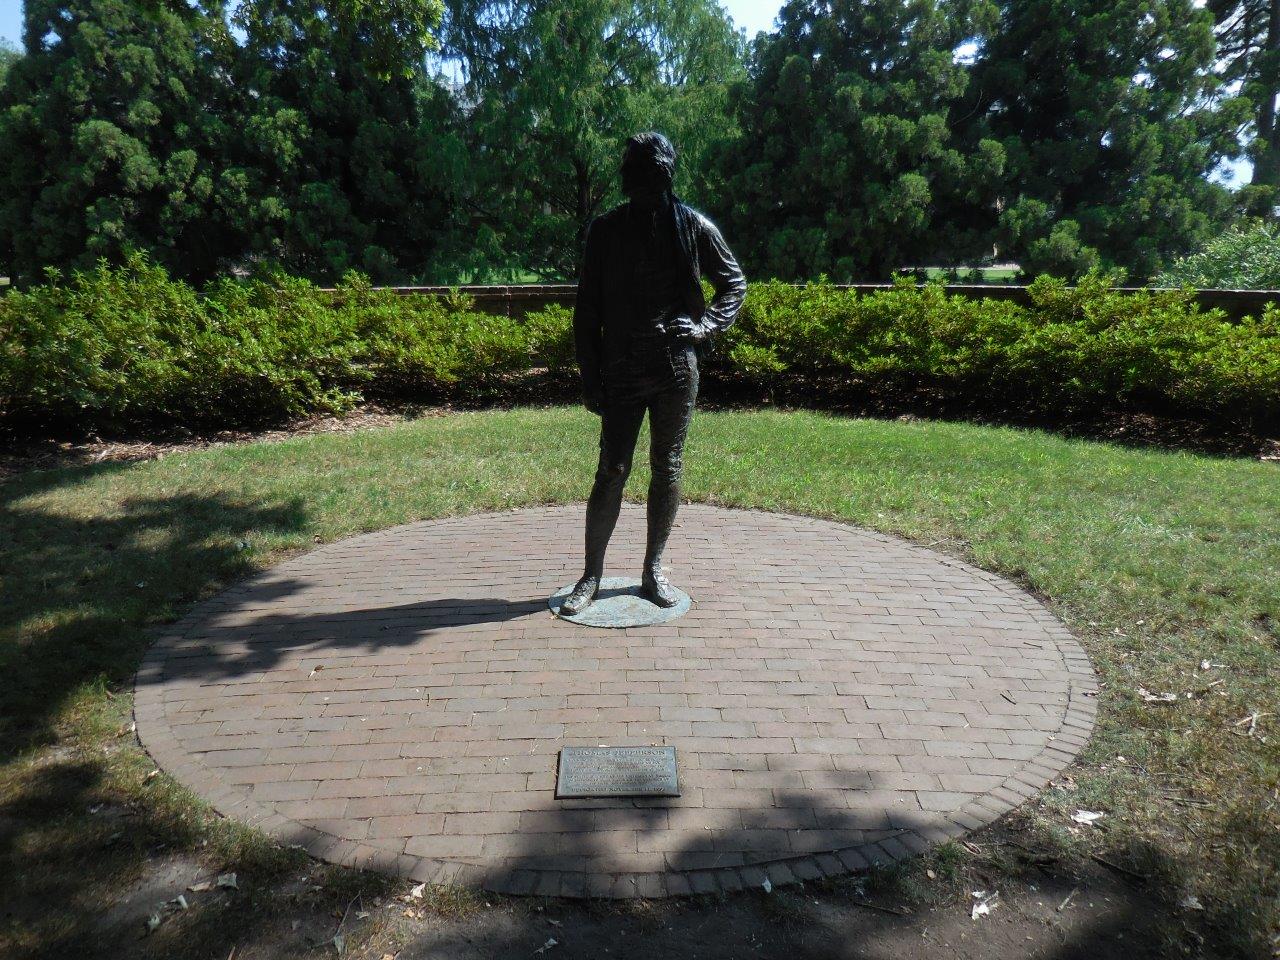 Thomas Jefferson statue at the College of William and Mary